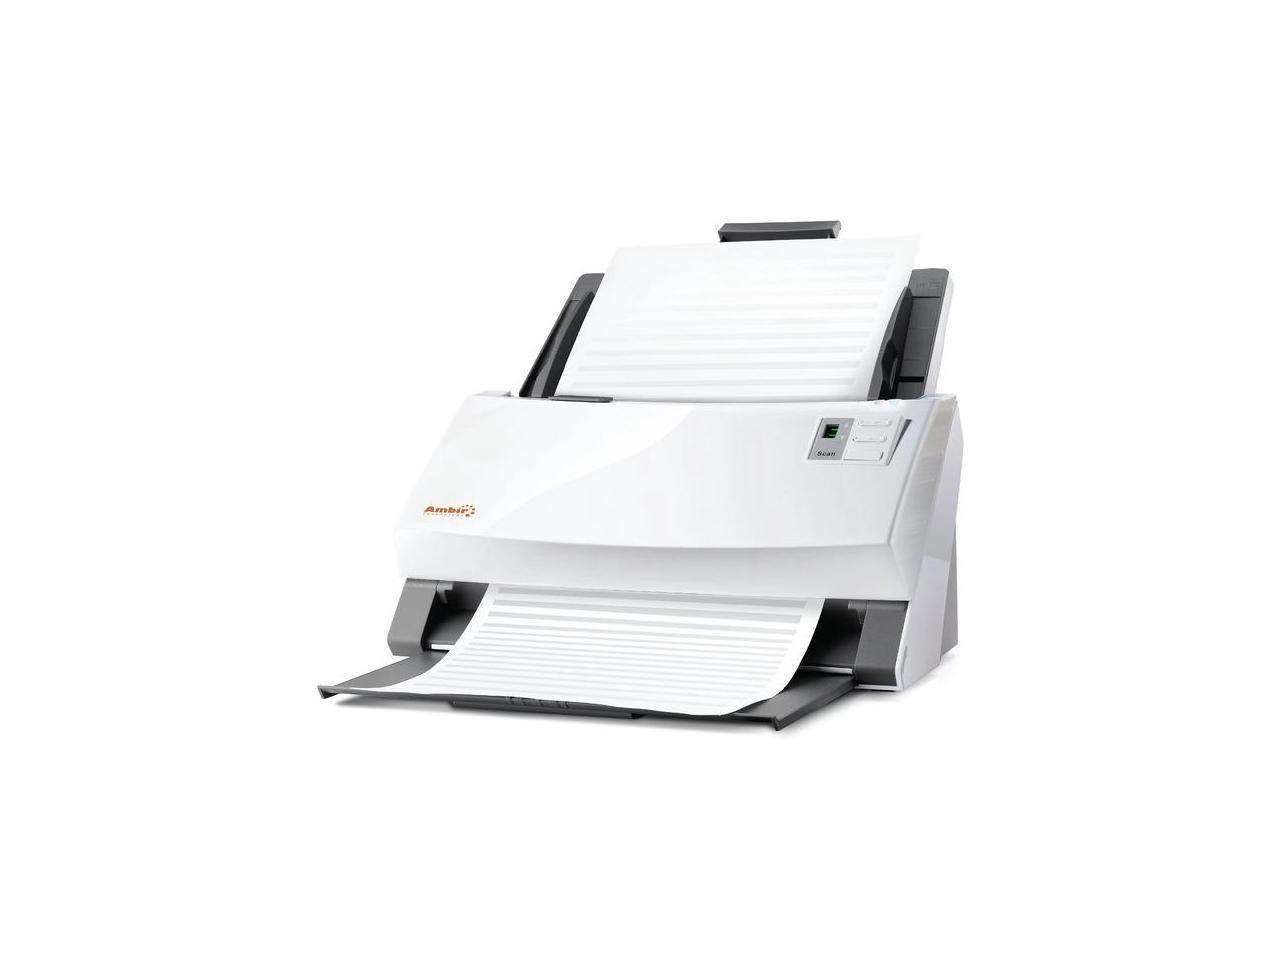 Ambir Technology Ambir ImageScan Pro 340U - Document Scanner - CCD - Duplex - 8.5 In X 200 In - 600 Dpi - Up To 40 PPM (Mono) / Up To 40 PPM (Color) - Adf (100 Sheets) - Up To 3000 Scans Per Day - Usb